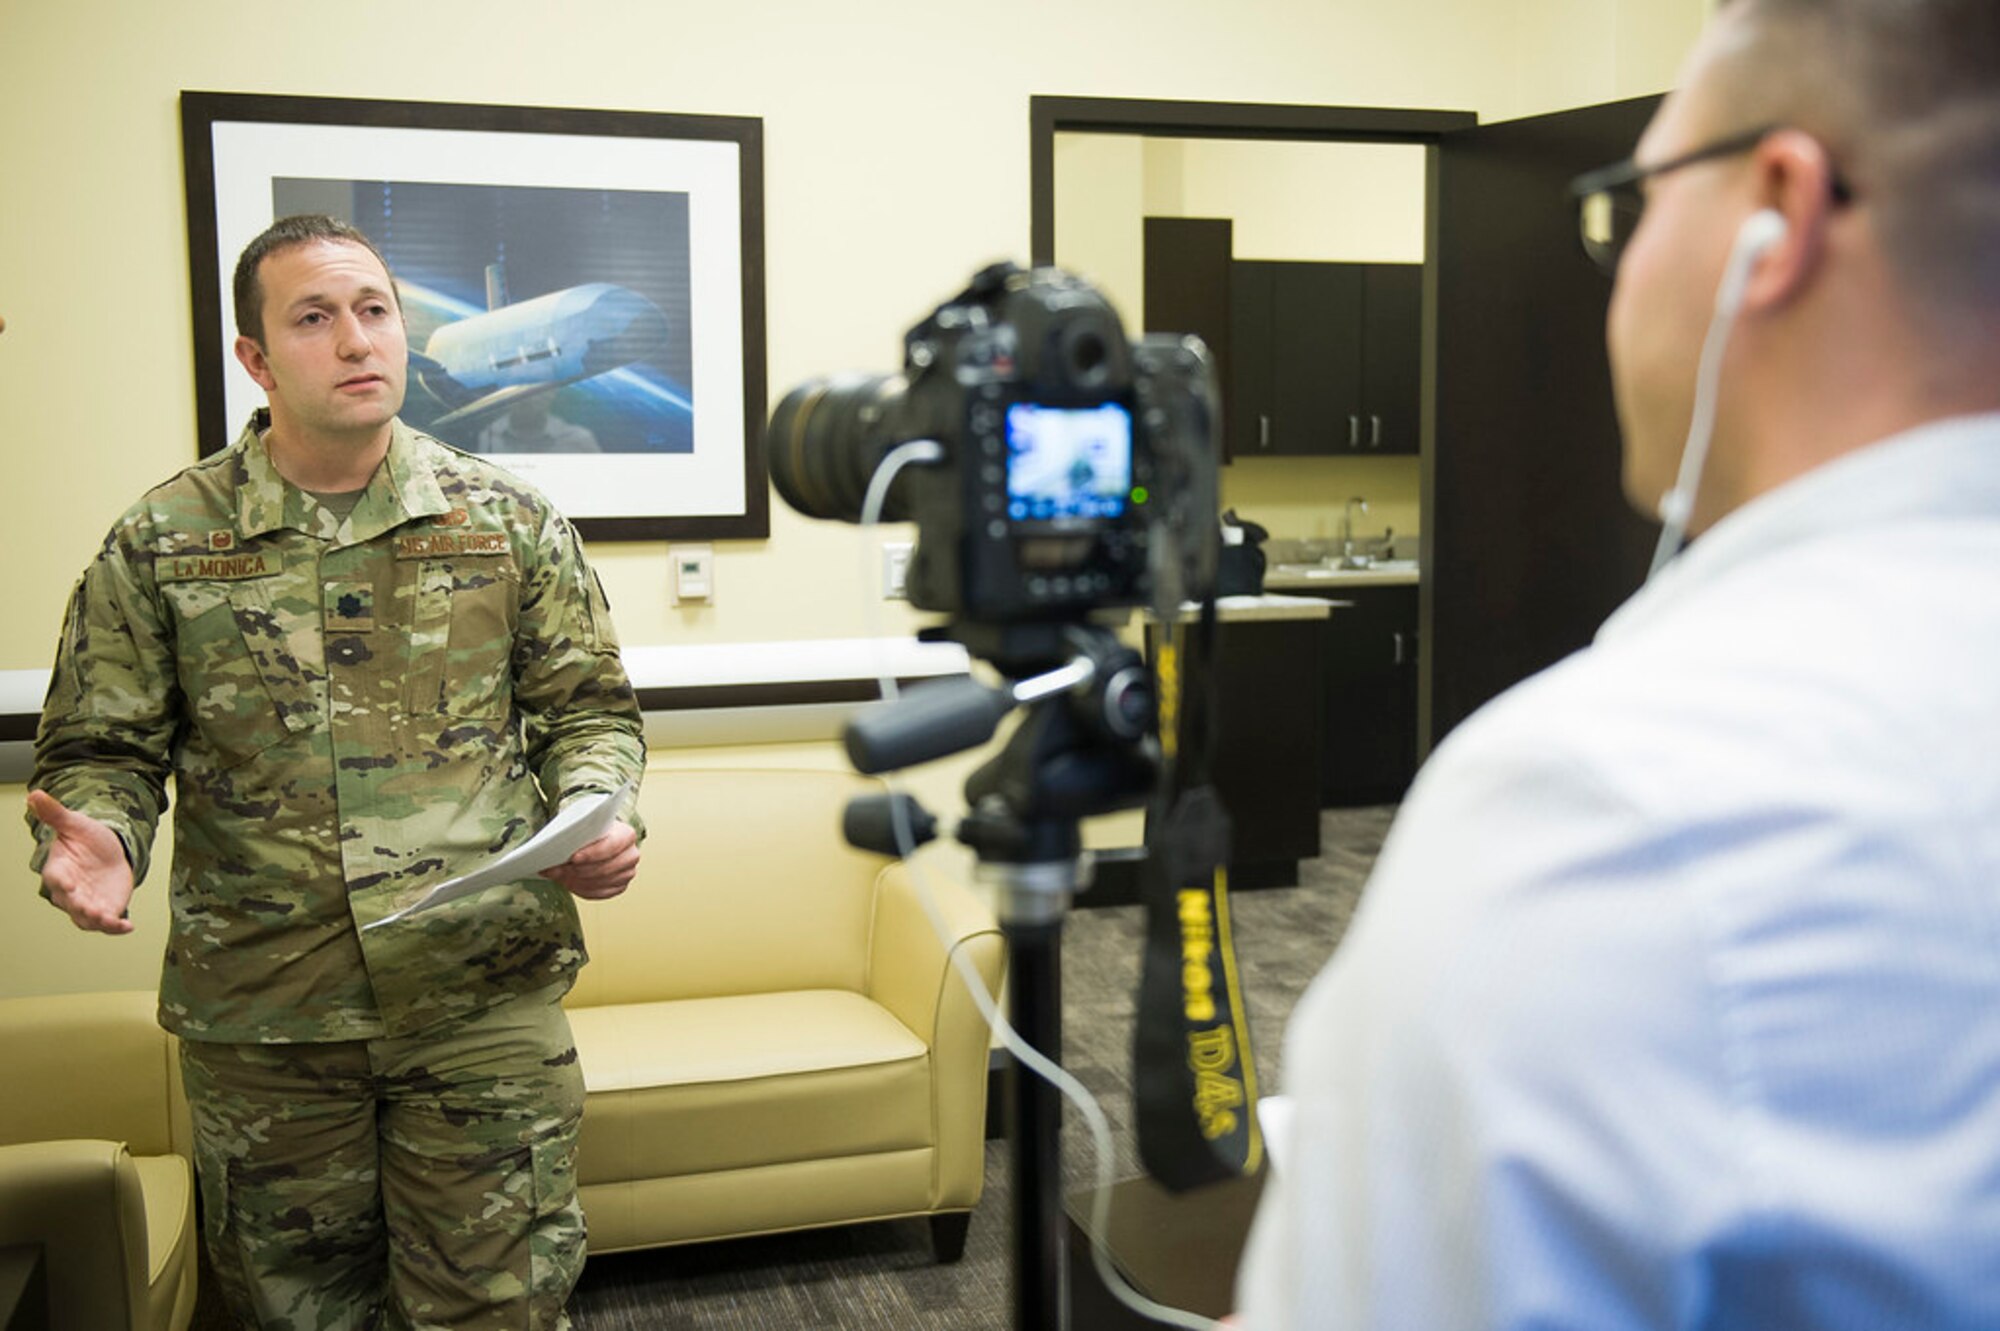 Lt. Col. Joseph La Monica gives an interview to a mock reporter during media training at the 2019 AFDW Squadron Commanders Course at Joint Base Andrews, Md., April 16, 2019. (U.S. Air Force photo by Master Sgt. Michael B. Keller)